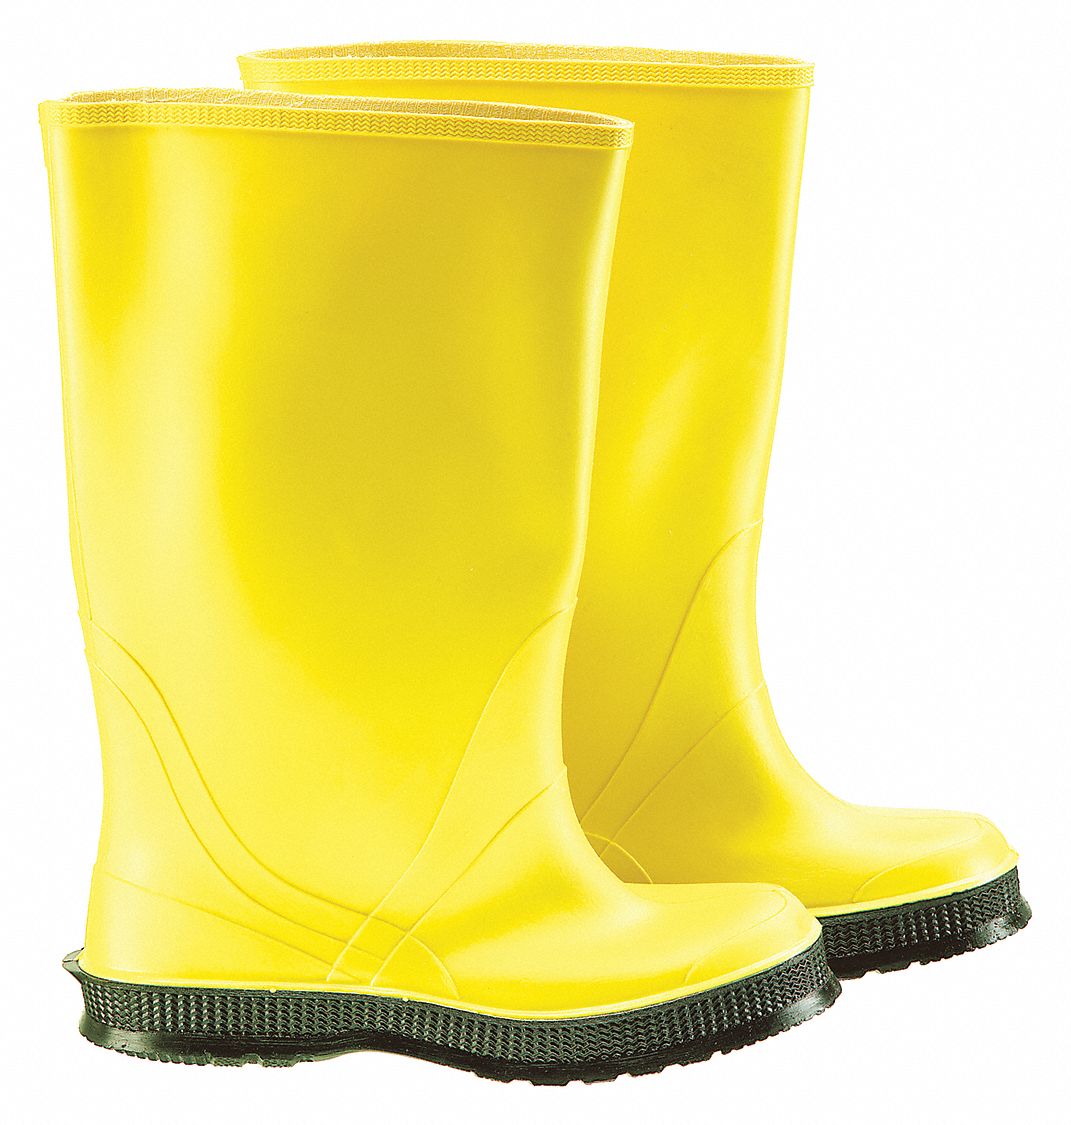 Overboots,11,PVC,Cleated,17inH,Yellow,PR - Grainger